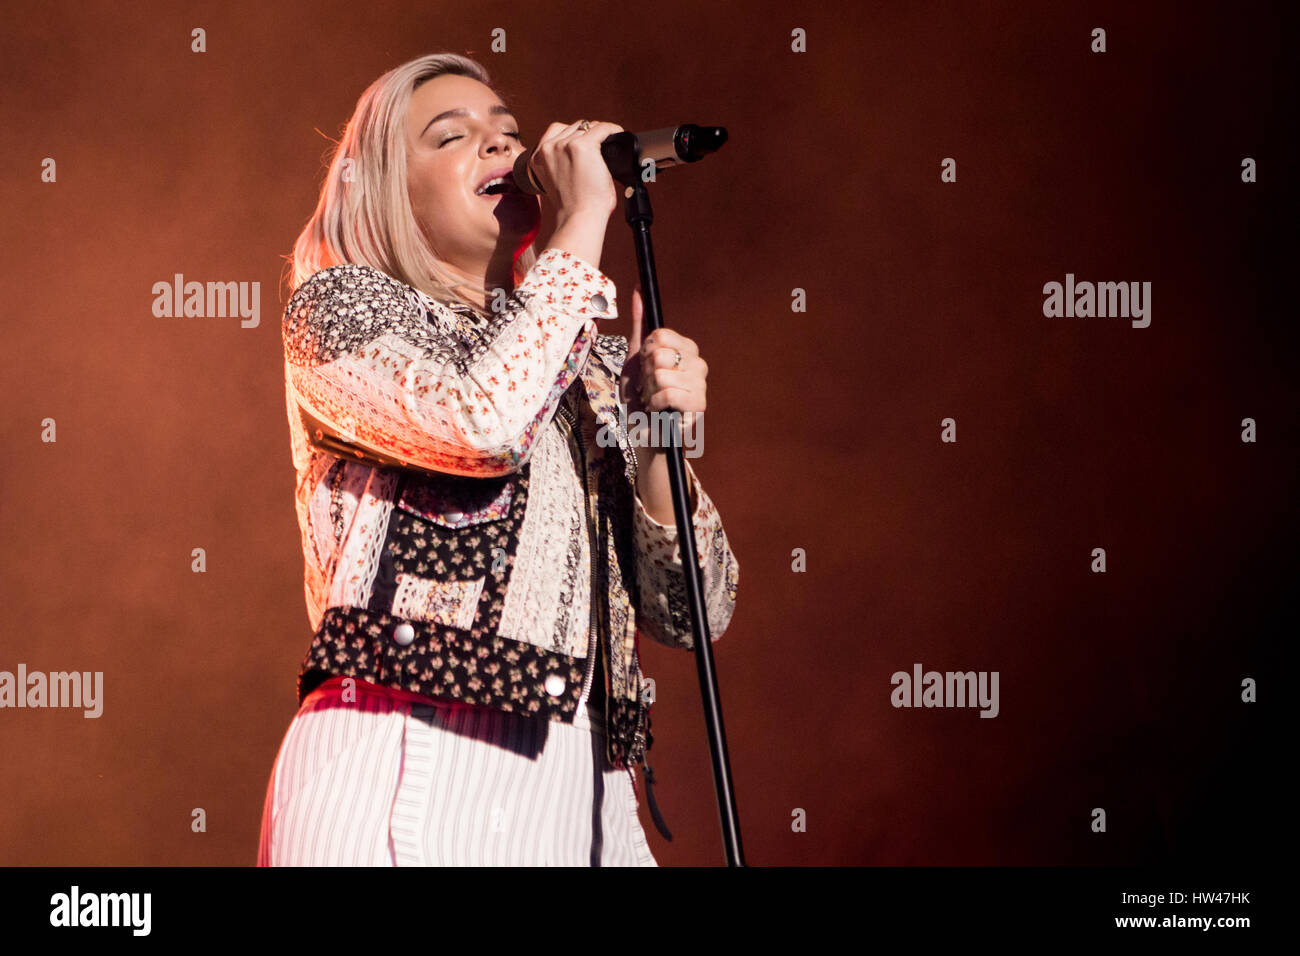 Turin, Italy. 16th Mar, 2017. The English singer-songwriter Anne-Marie Nicholson known professionally as ANNE-MARIE performs live on stage at PalaAlpitour opening the show of Ed Sheeran Credit: Rodolfo Sassano/Alamy Live News Stock Photo